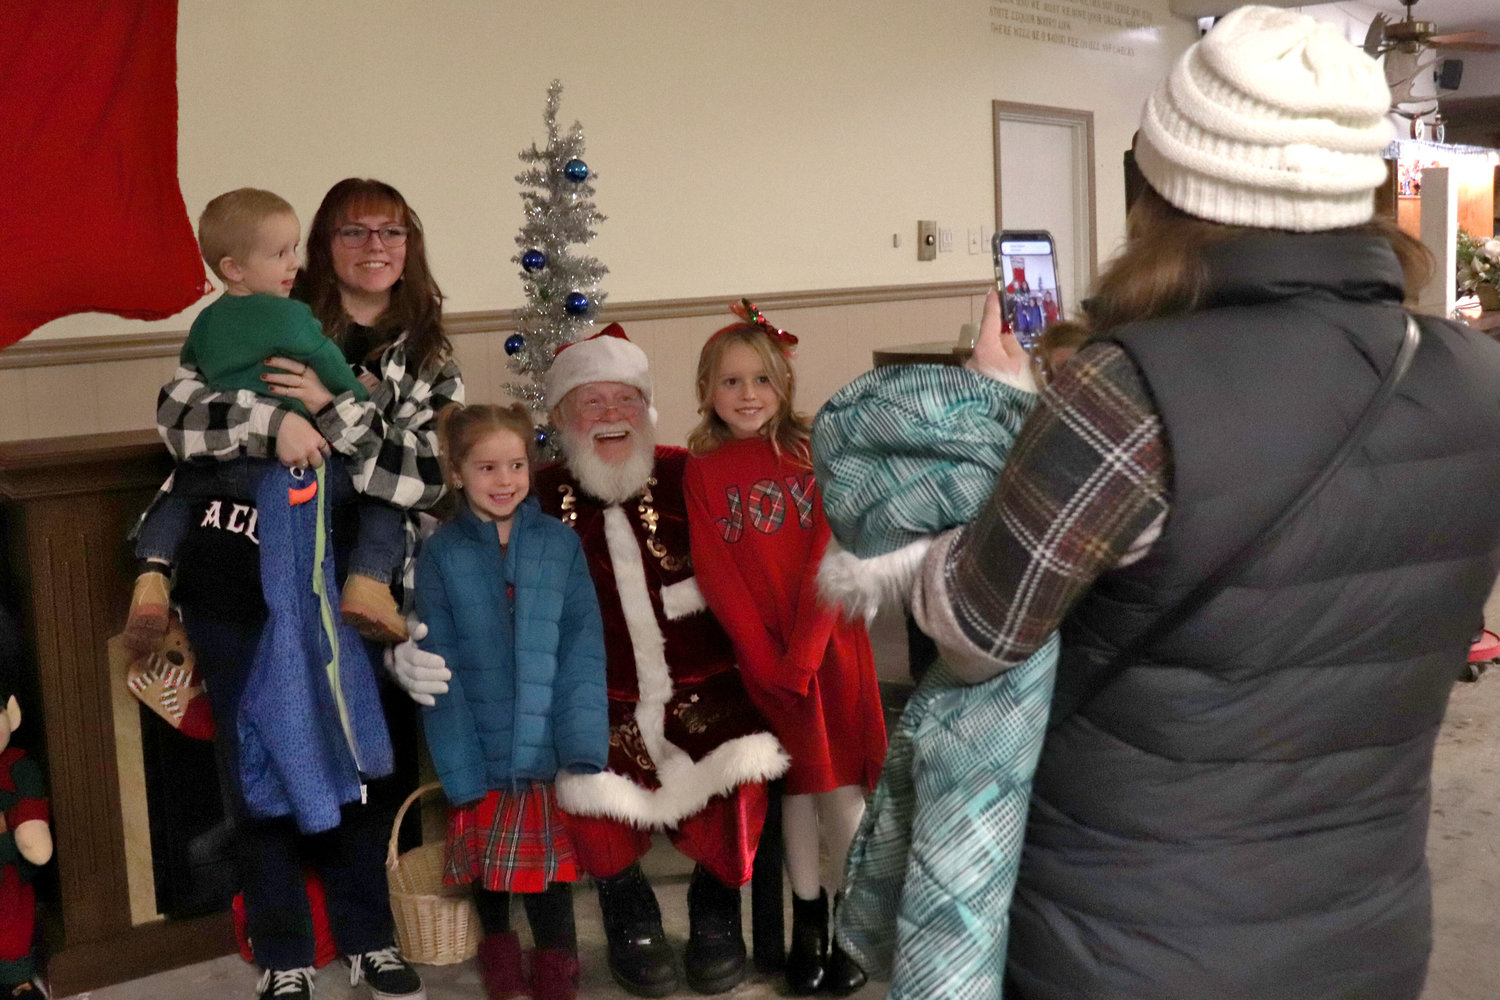 Emery, Harper, Mason, Sophie and Ford pose for a photo with Santa Claus at the annual Breakfast with Santa event, held at the Moose Family Center in Centralia on Saturday.